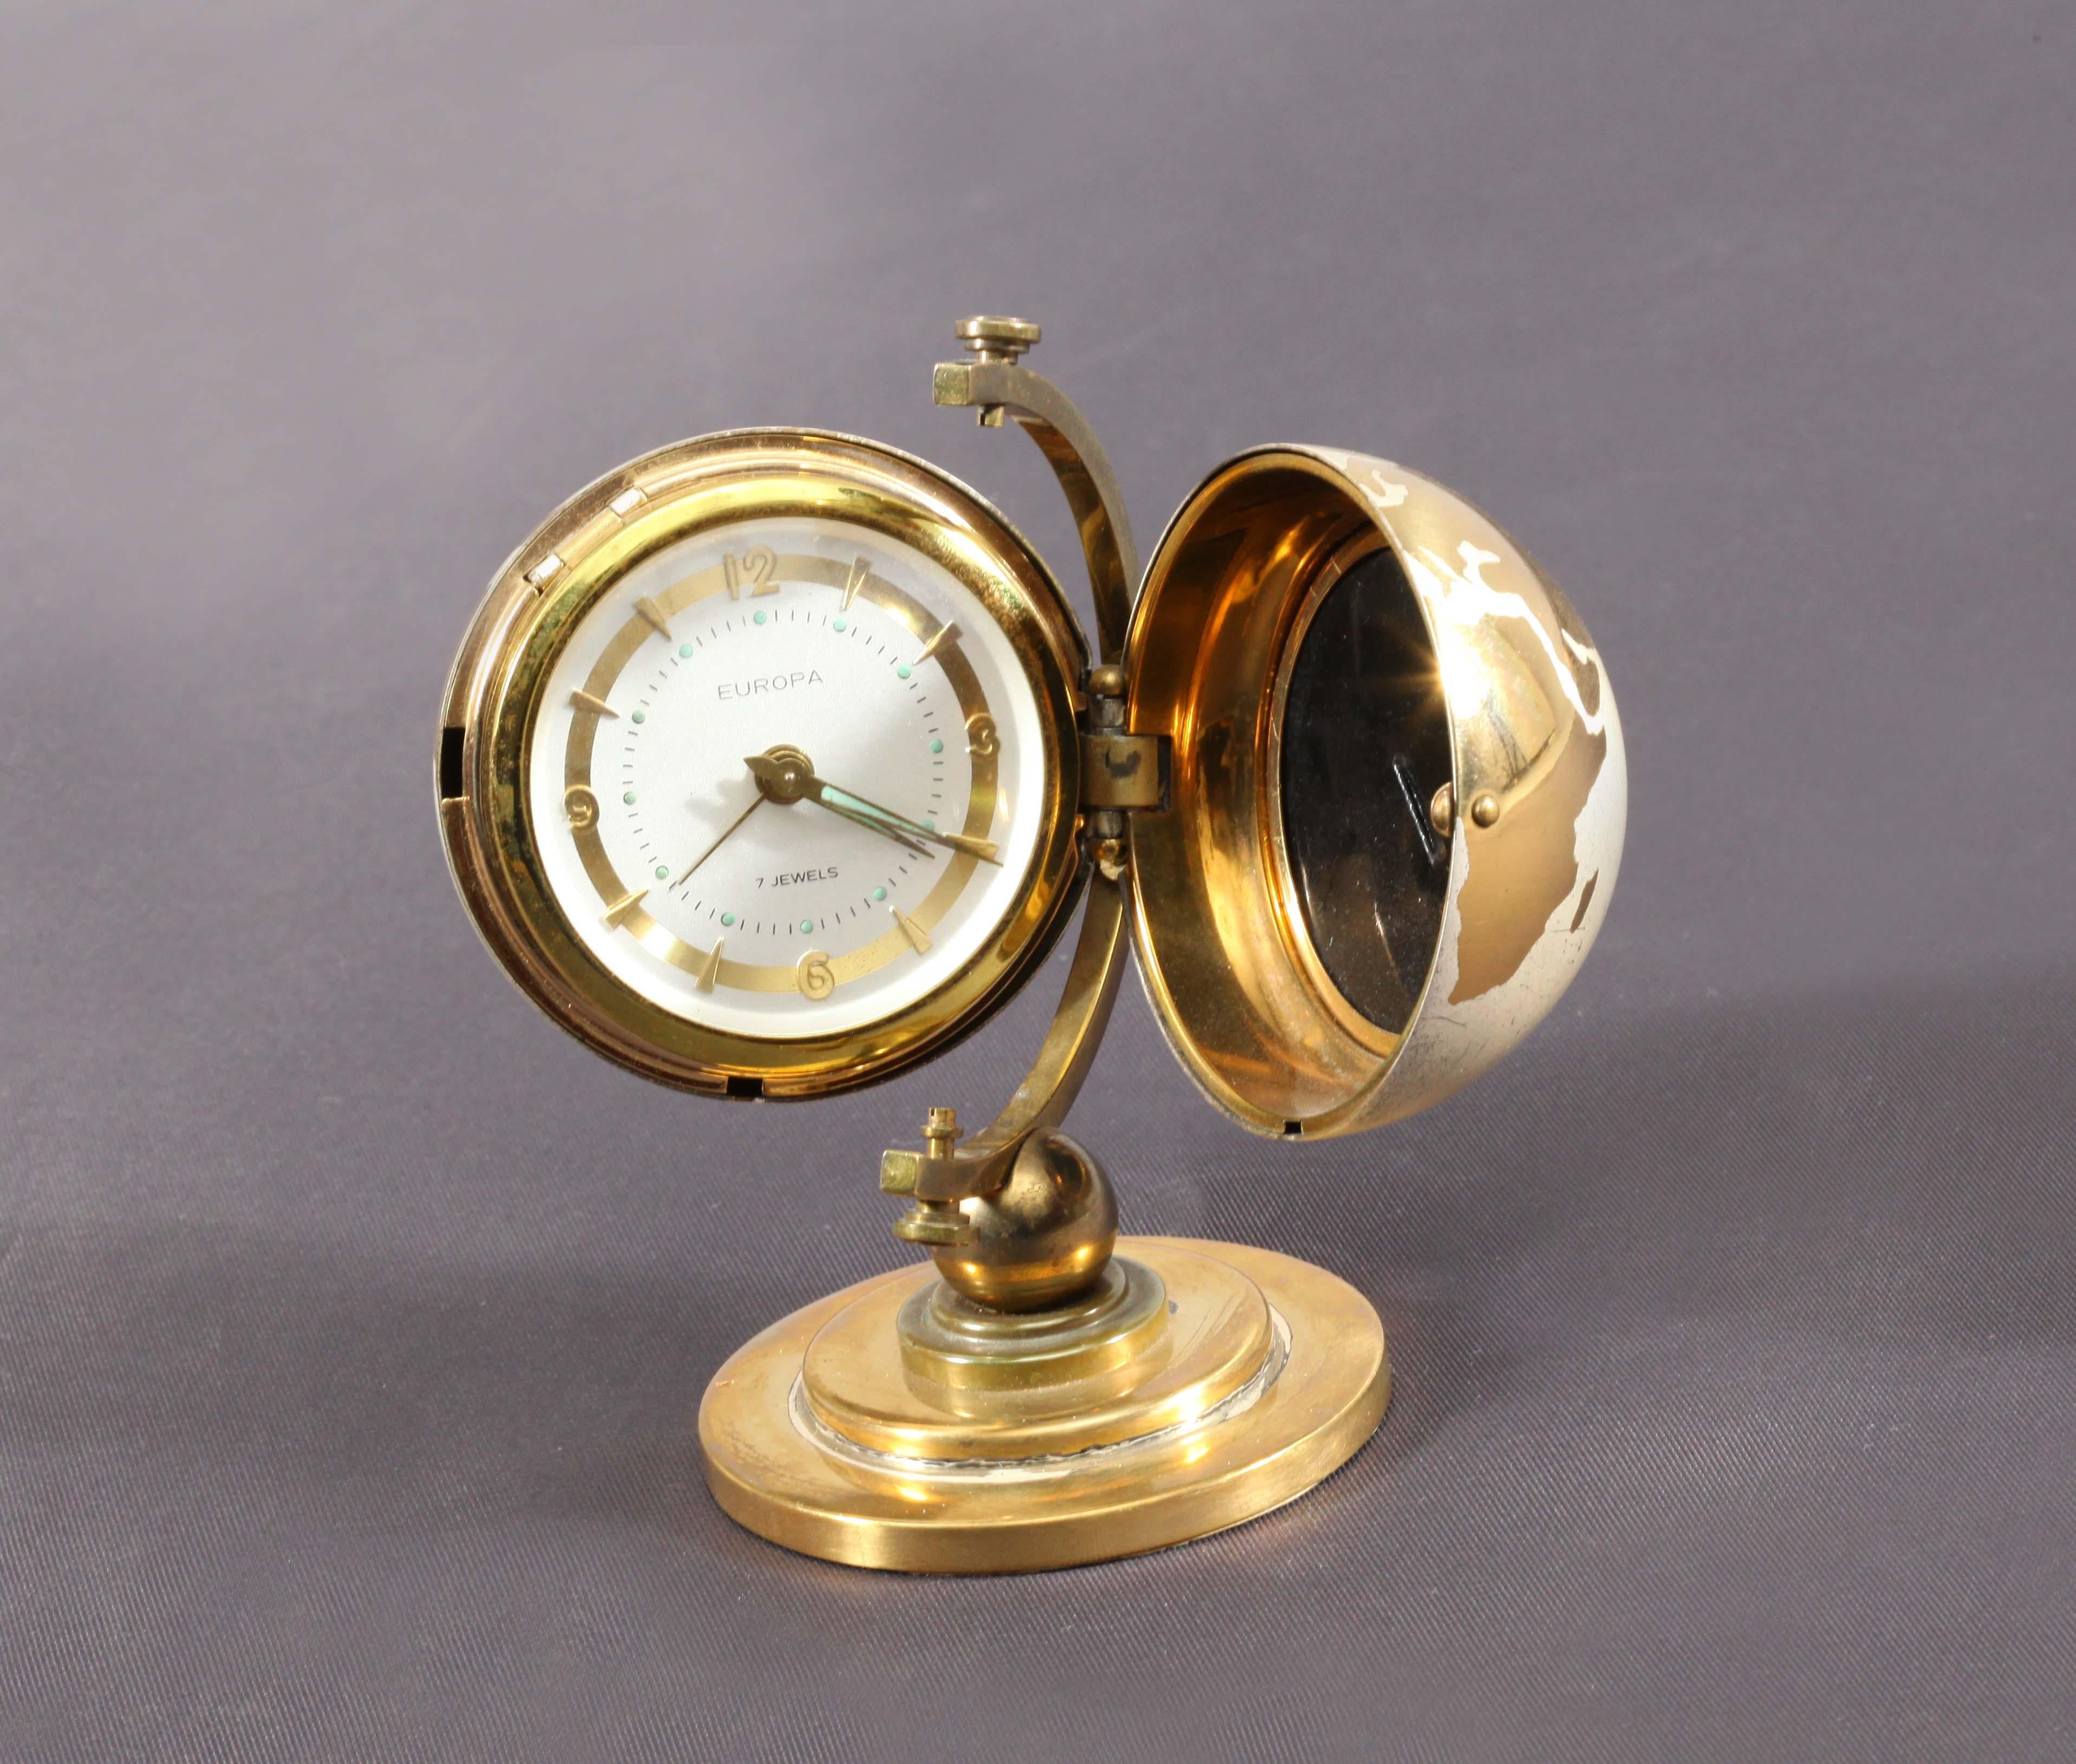 A beautiful modernist world globe brass desk clock with alarm from the 1950s. Executed by Europa, Germany. The clock has a manual winding movement and works excellently. In very good condition with nice patina.